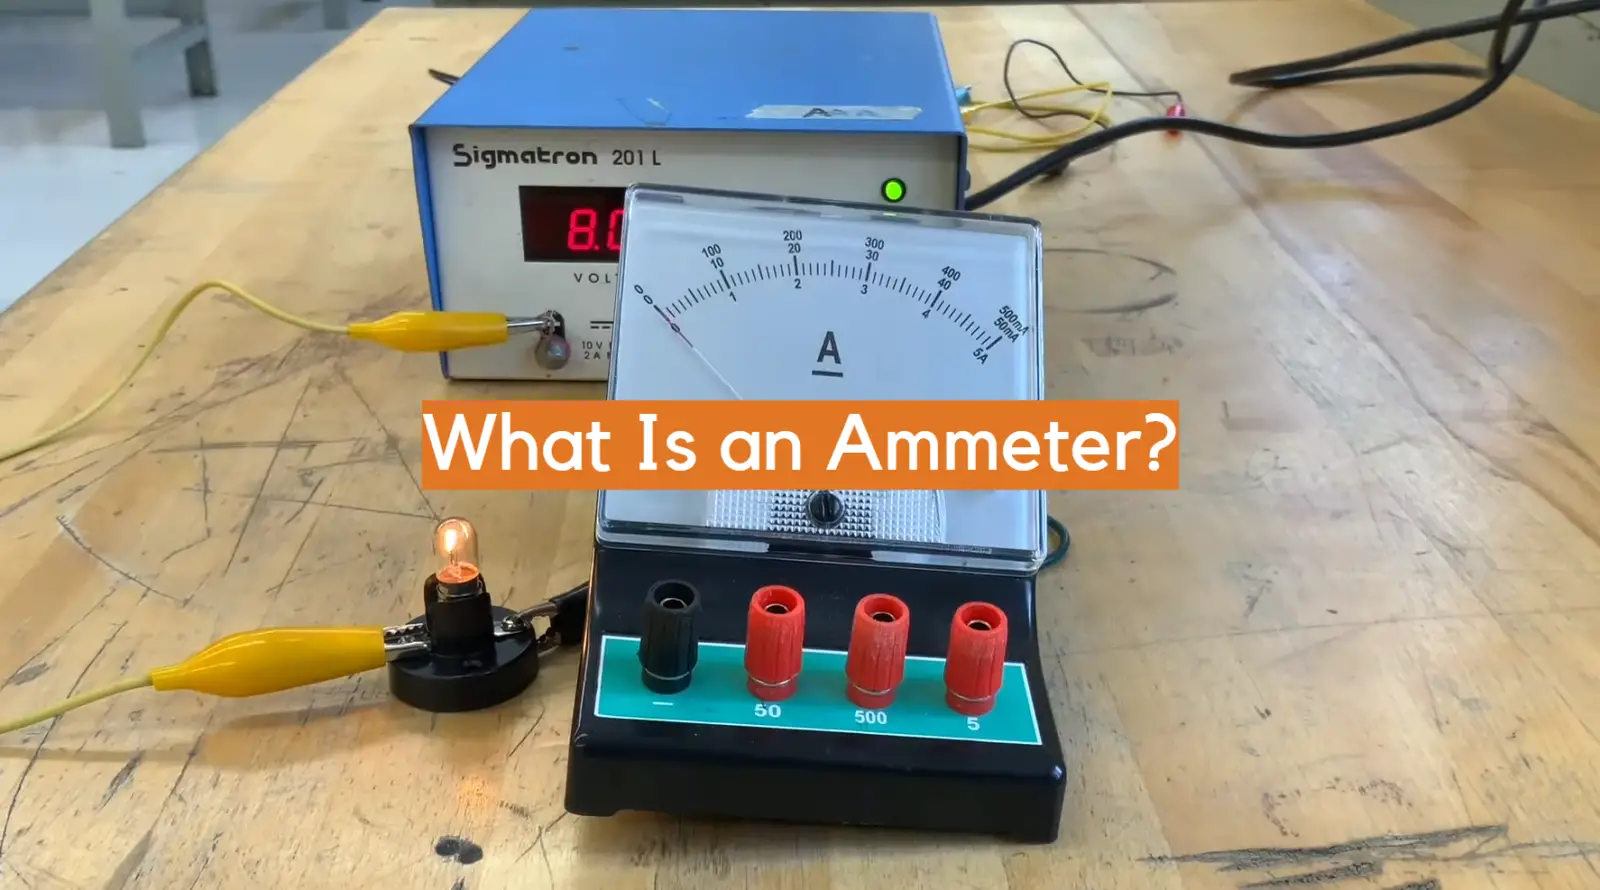 What Is an Ammeter?